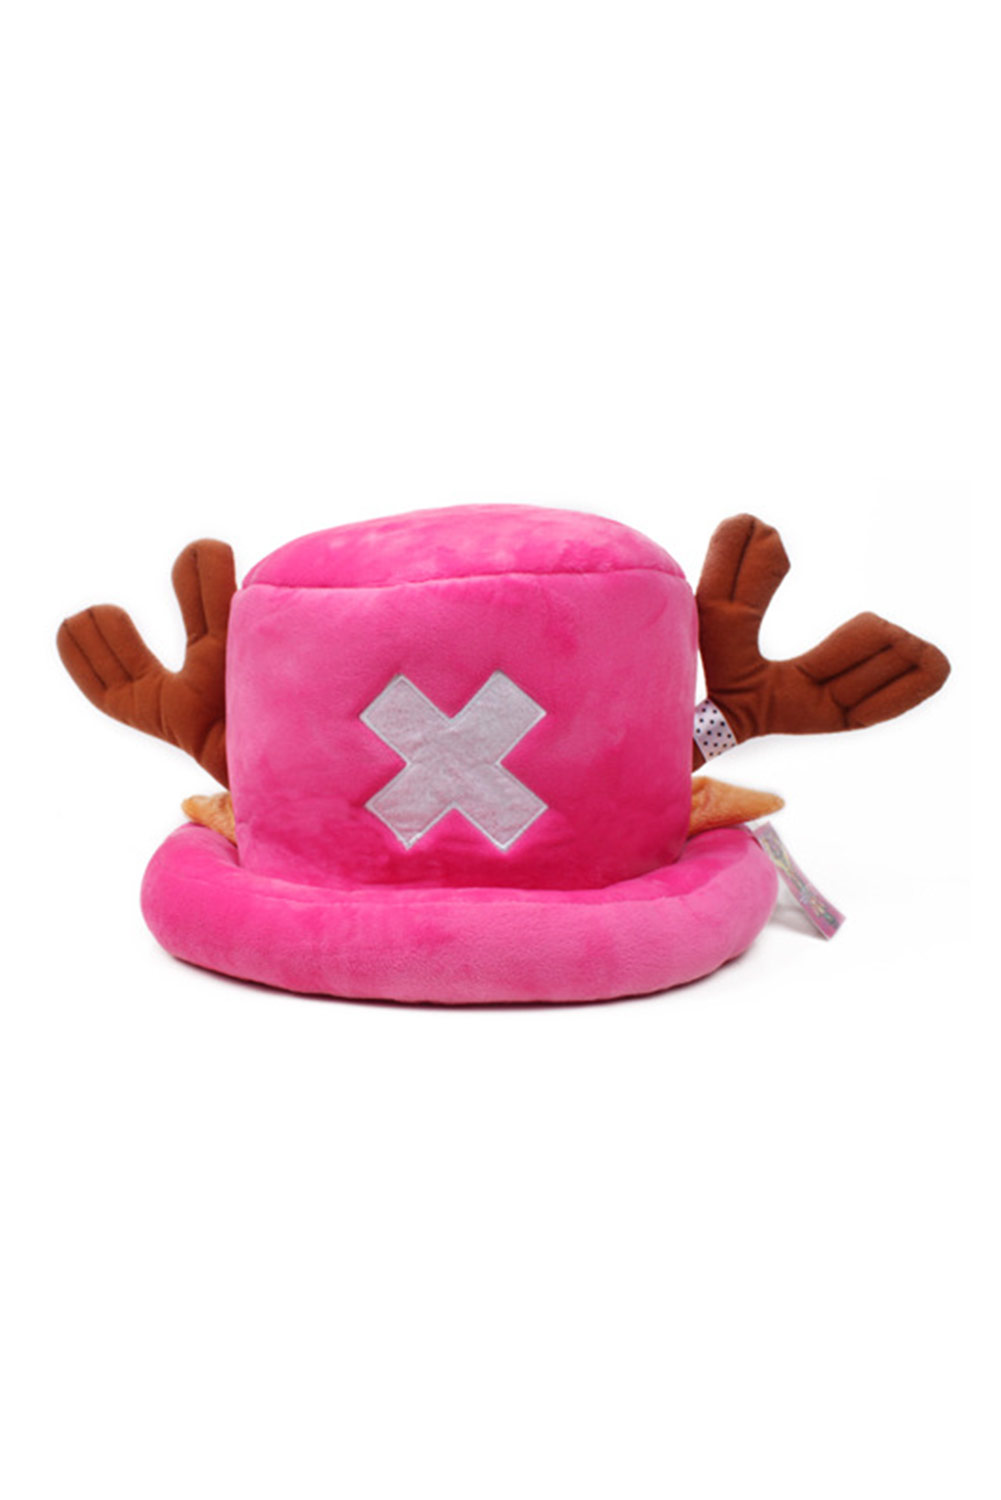 Anime One Piece Tony Tony Chopper Cosplay Pink Hat Halloween Carnival Costume Accessories